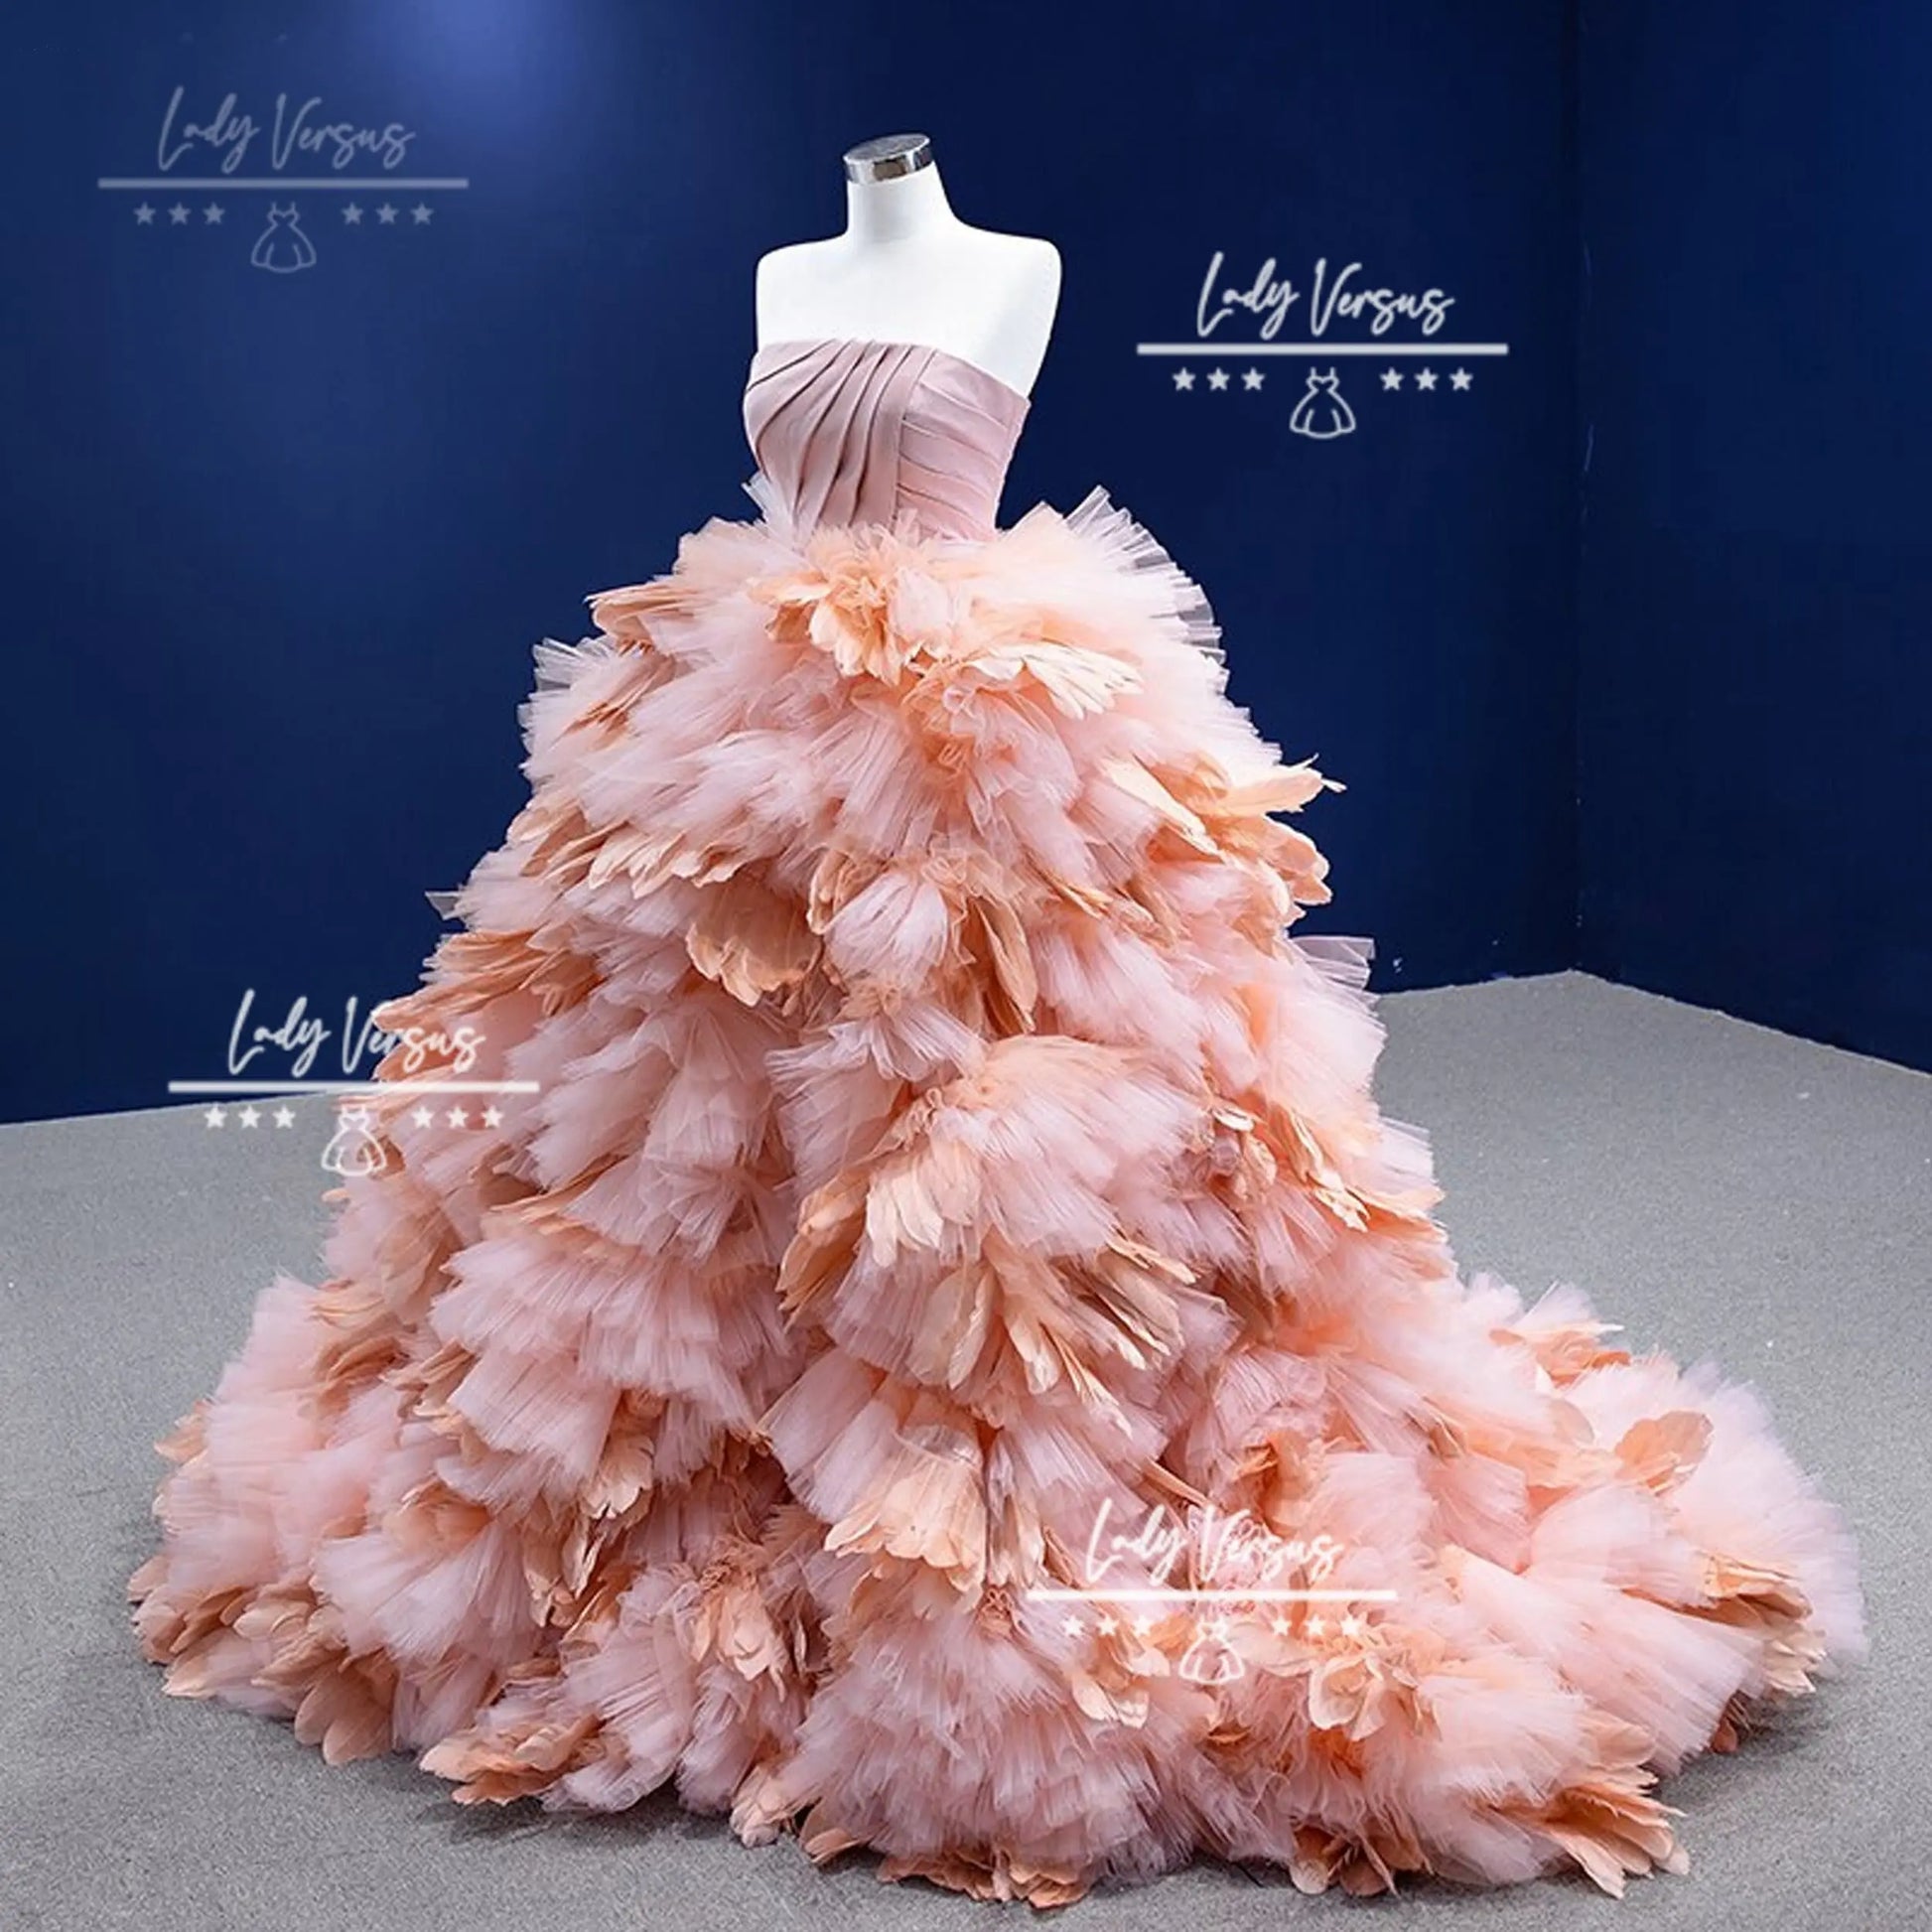 Luxury bridal princess dress/ Extravagant bridal gown/Gorgeous tulle and feathers cake skirt wedding dress/ ball gown/prom dress Lady Versus